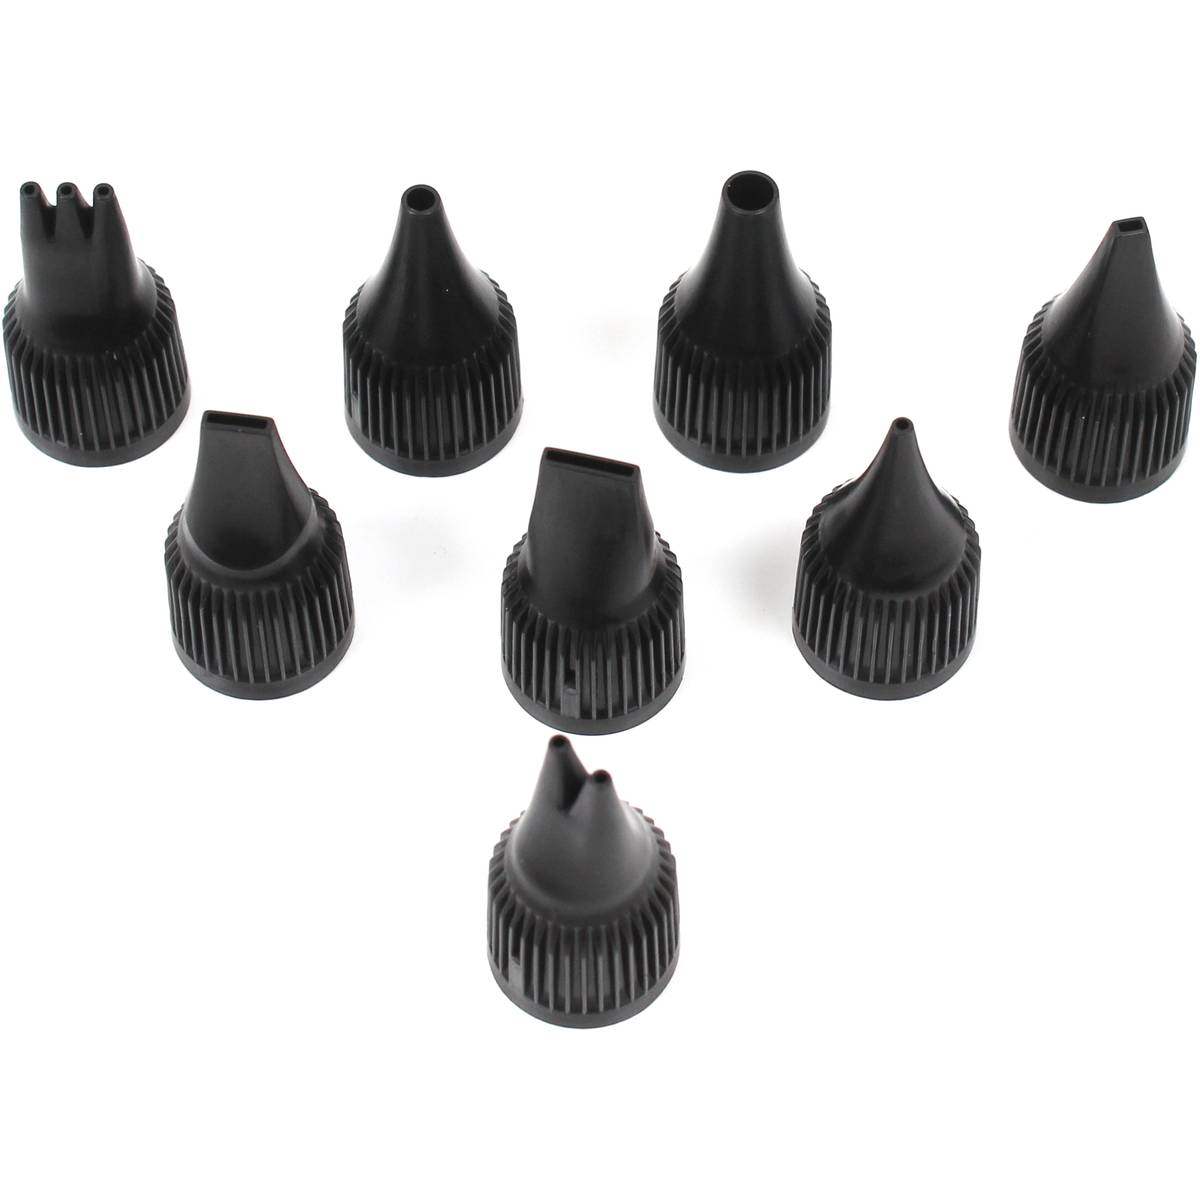 Sennelier Abstract Set of 8 Assorted Tips